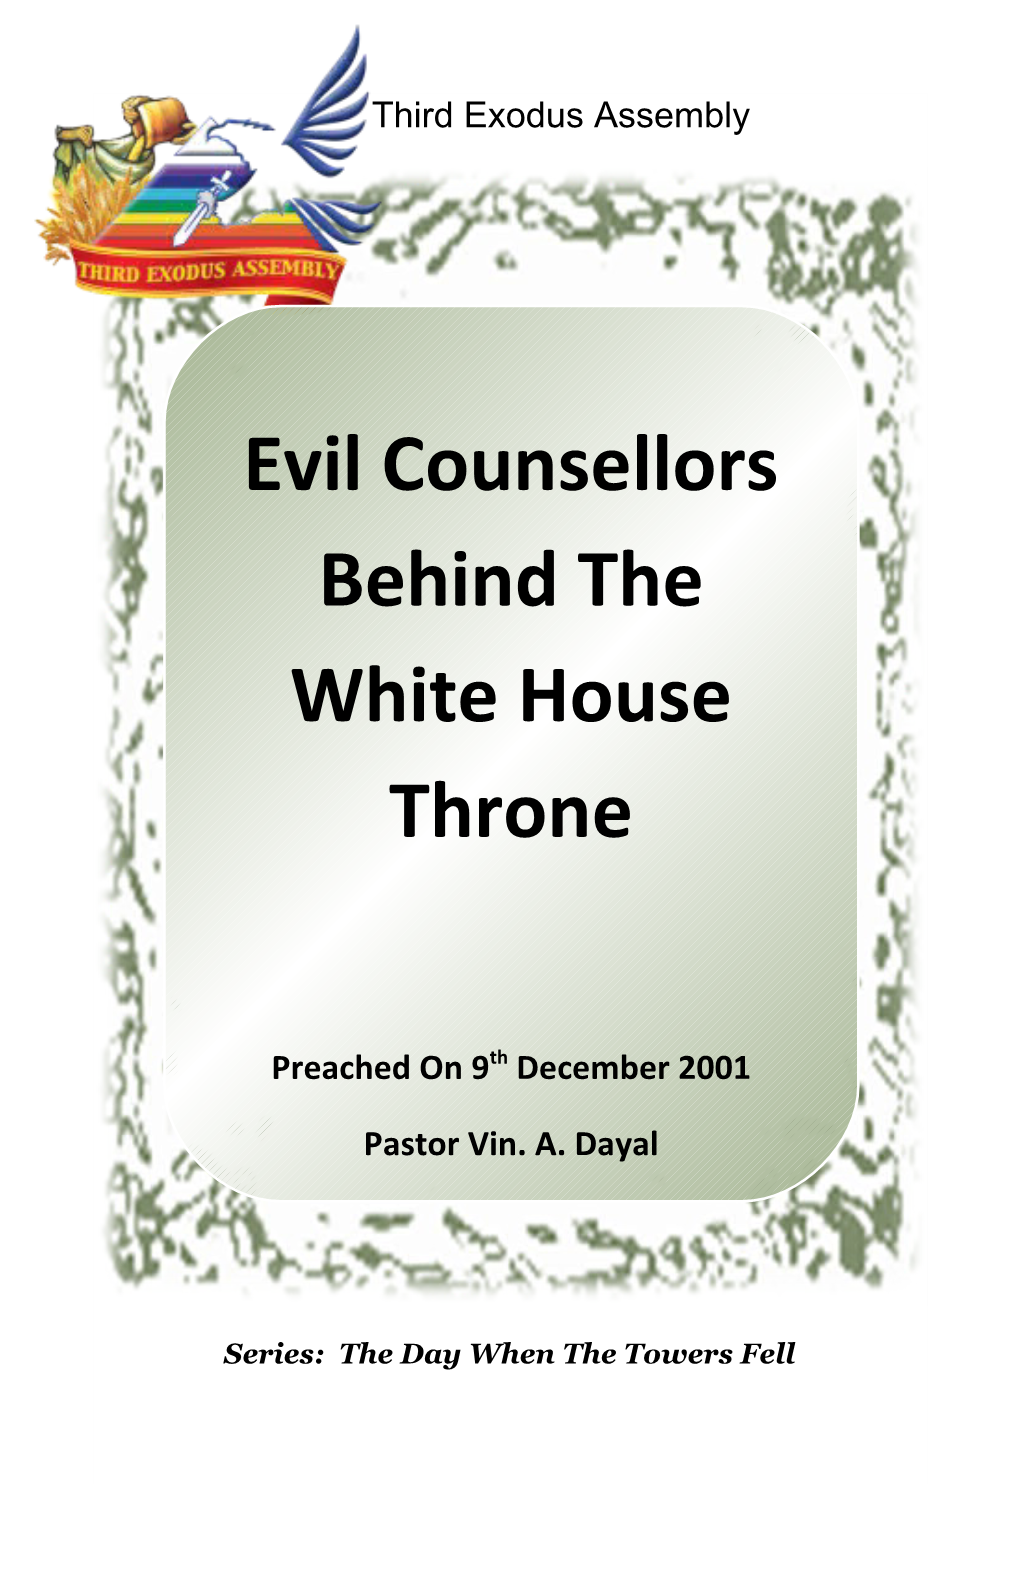 2001-1209 Evil Counsellors Behind the White House Throne